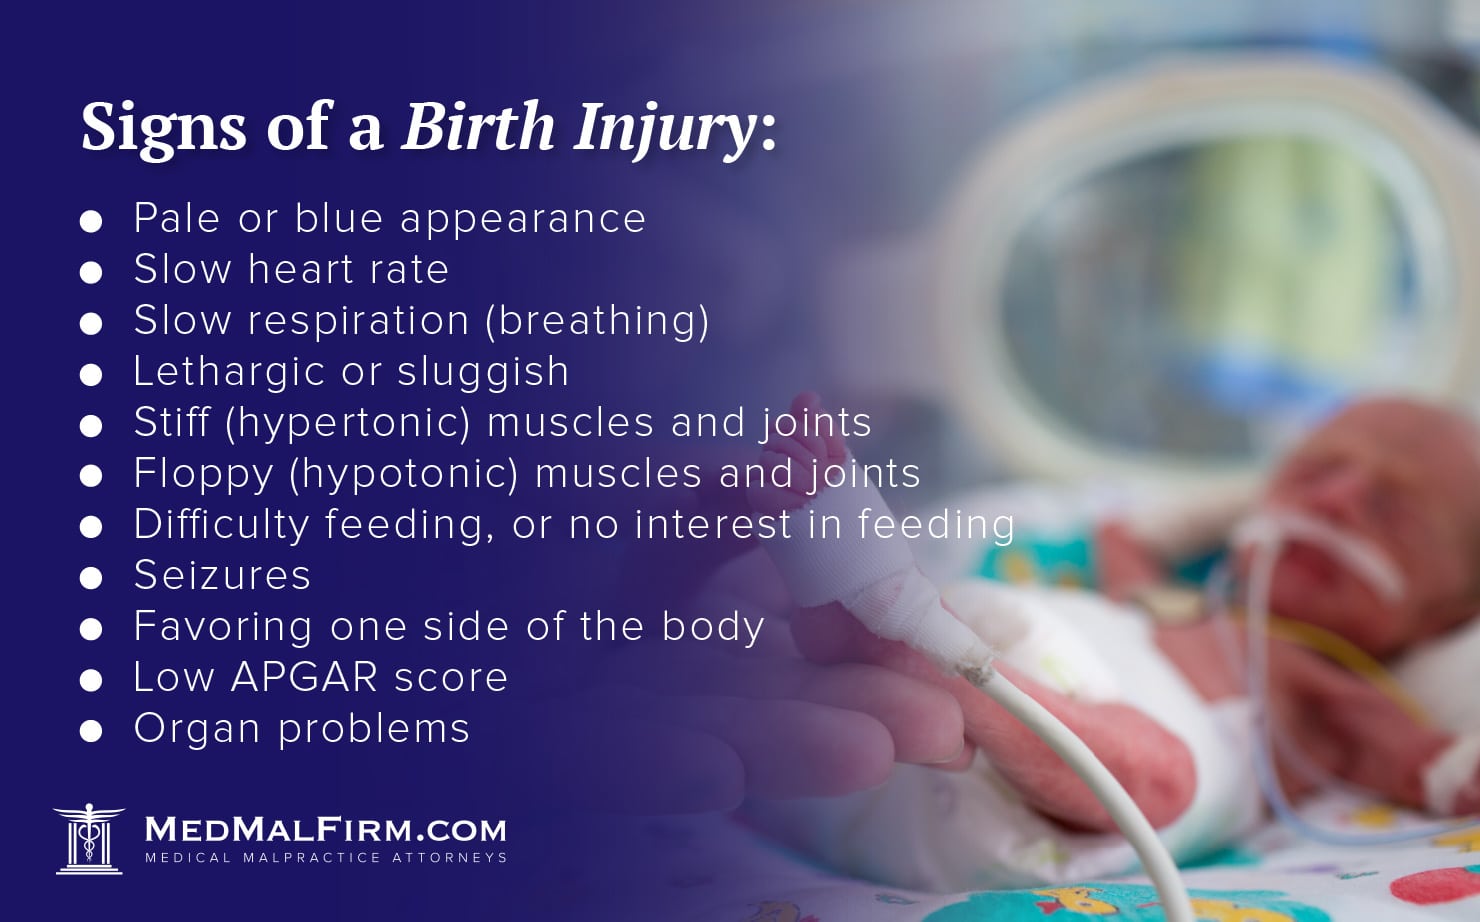 Signs of a Birth Injury